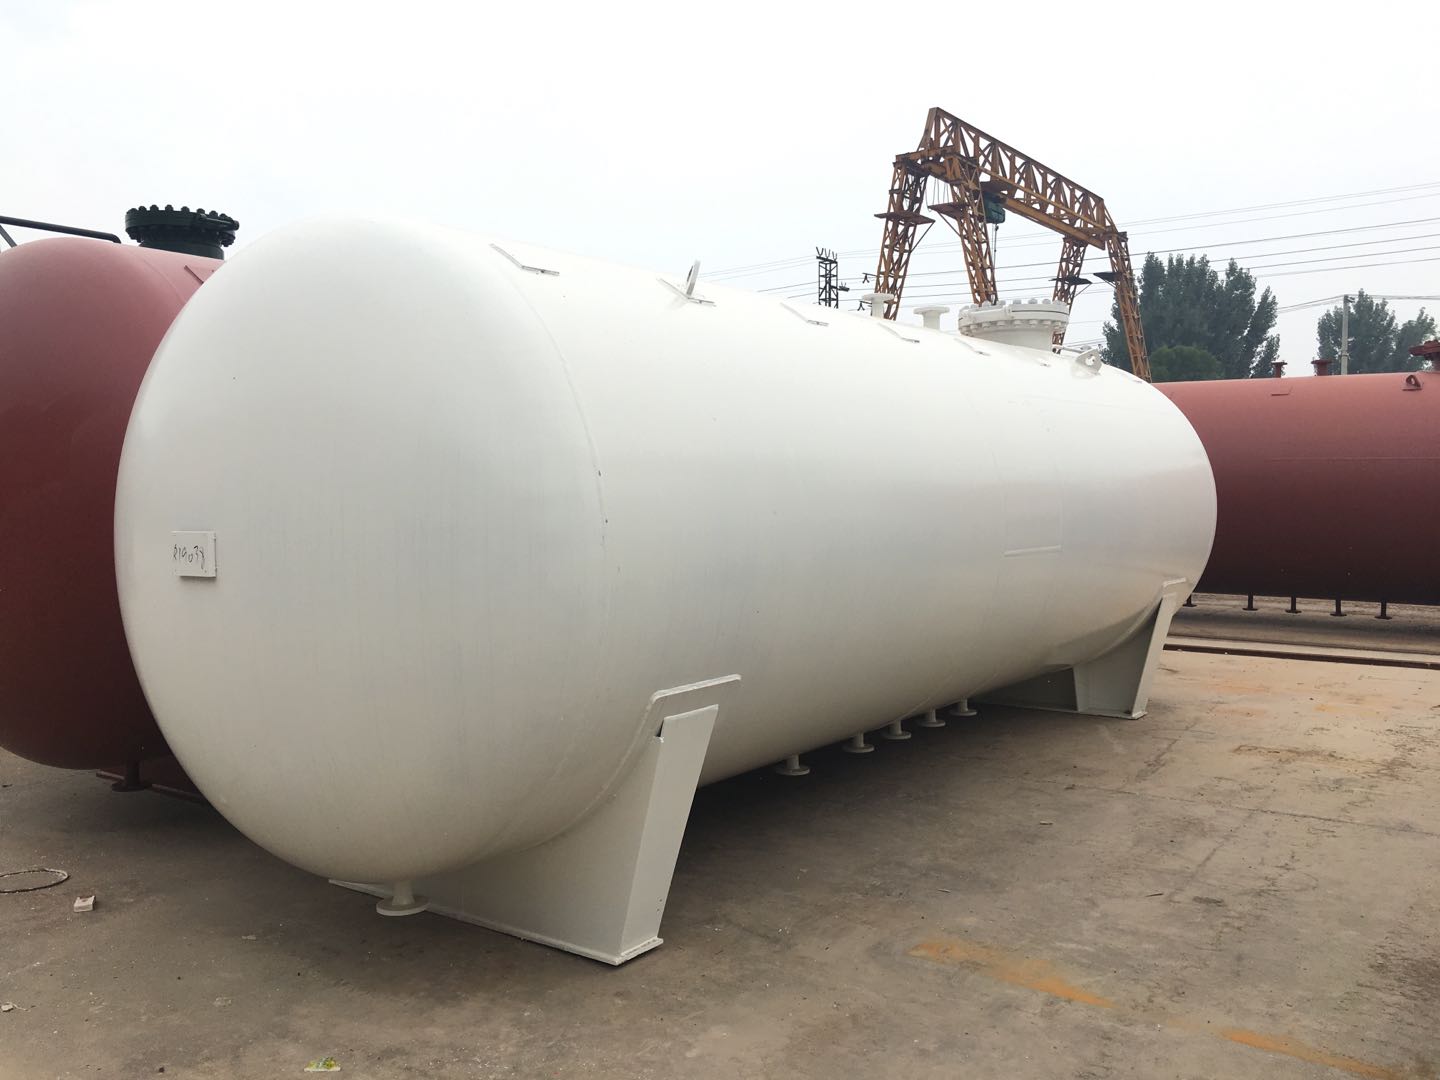 Liquefied gas storage tank inspection